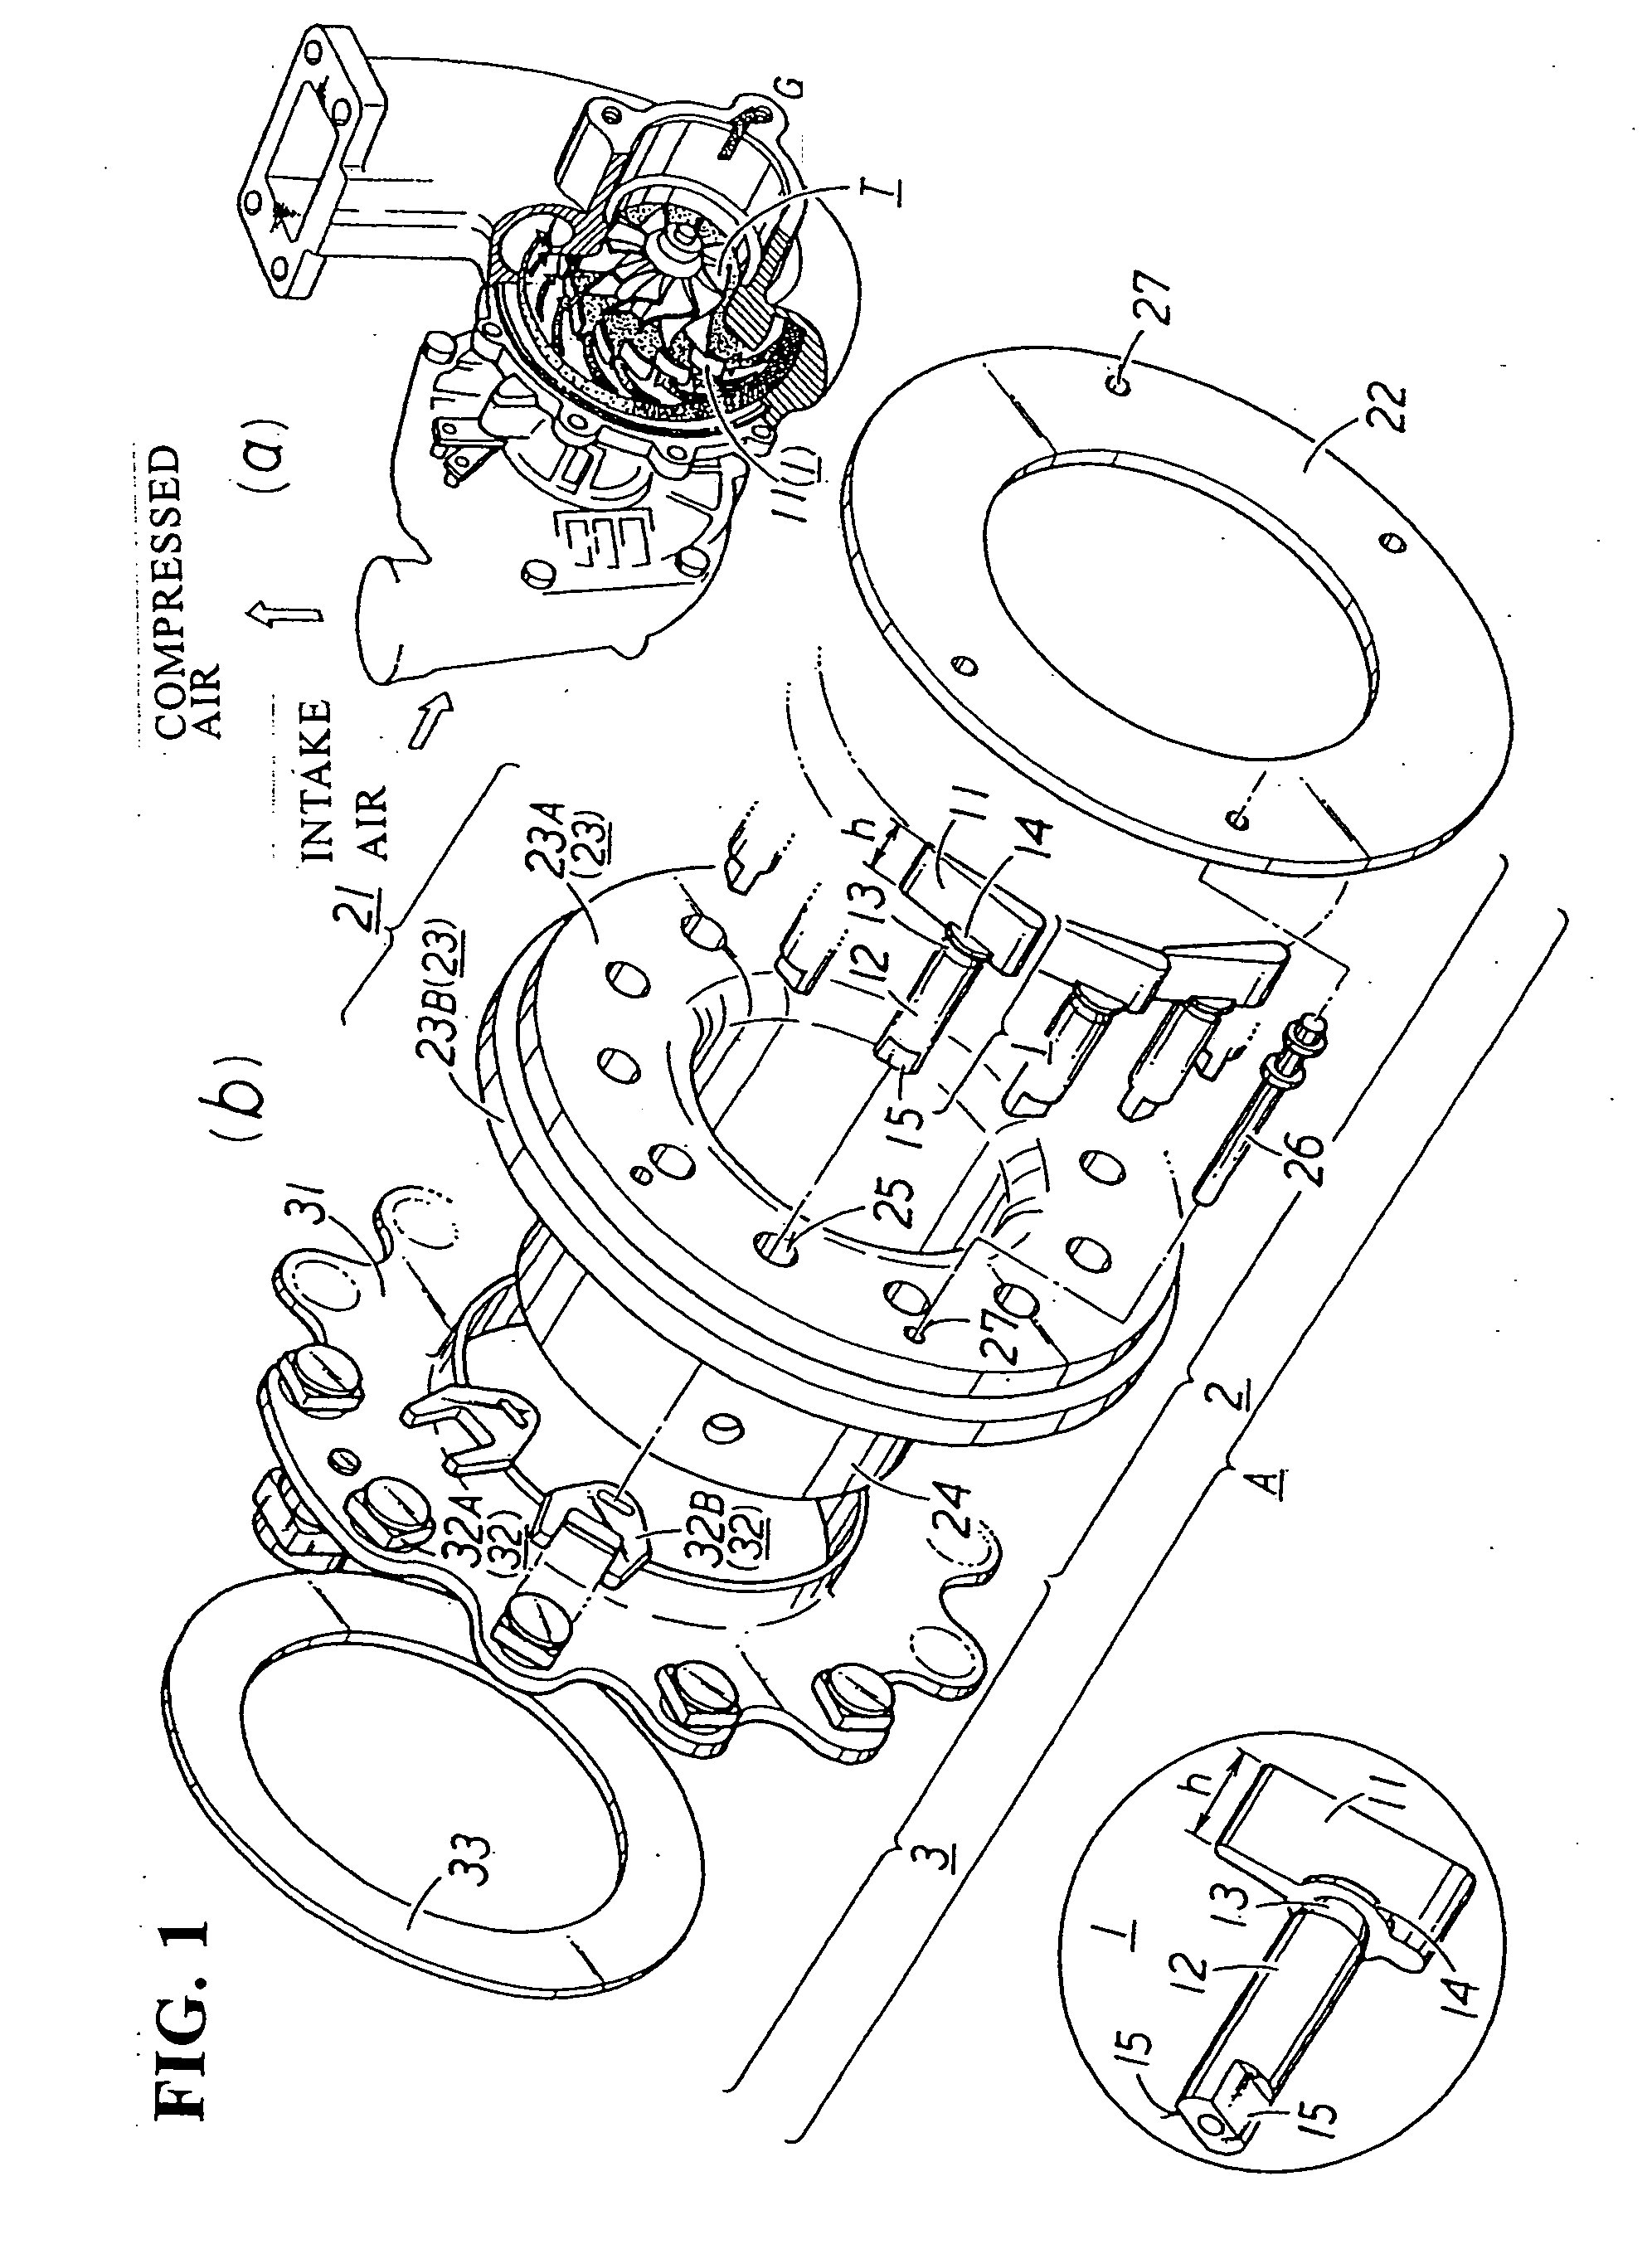 Method for manufacturing heat resisting member applicable to an exhaust gas guide assembly with improved heat resistance for VGS turbocharger